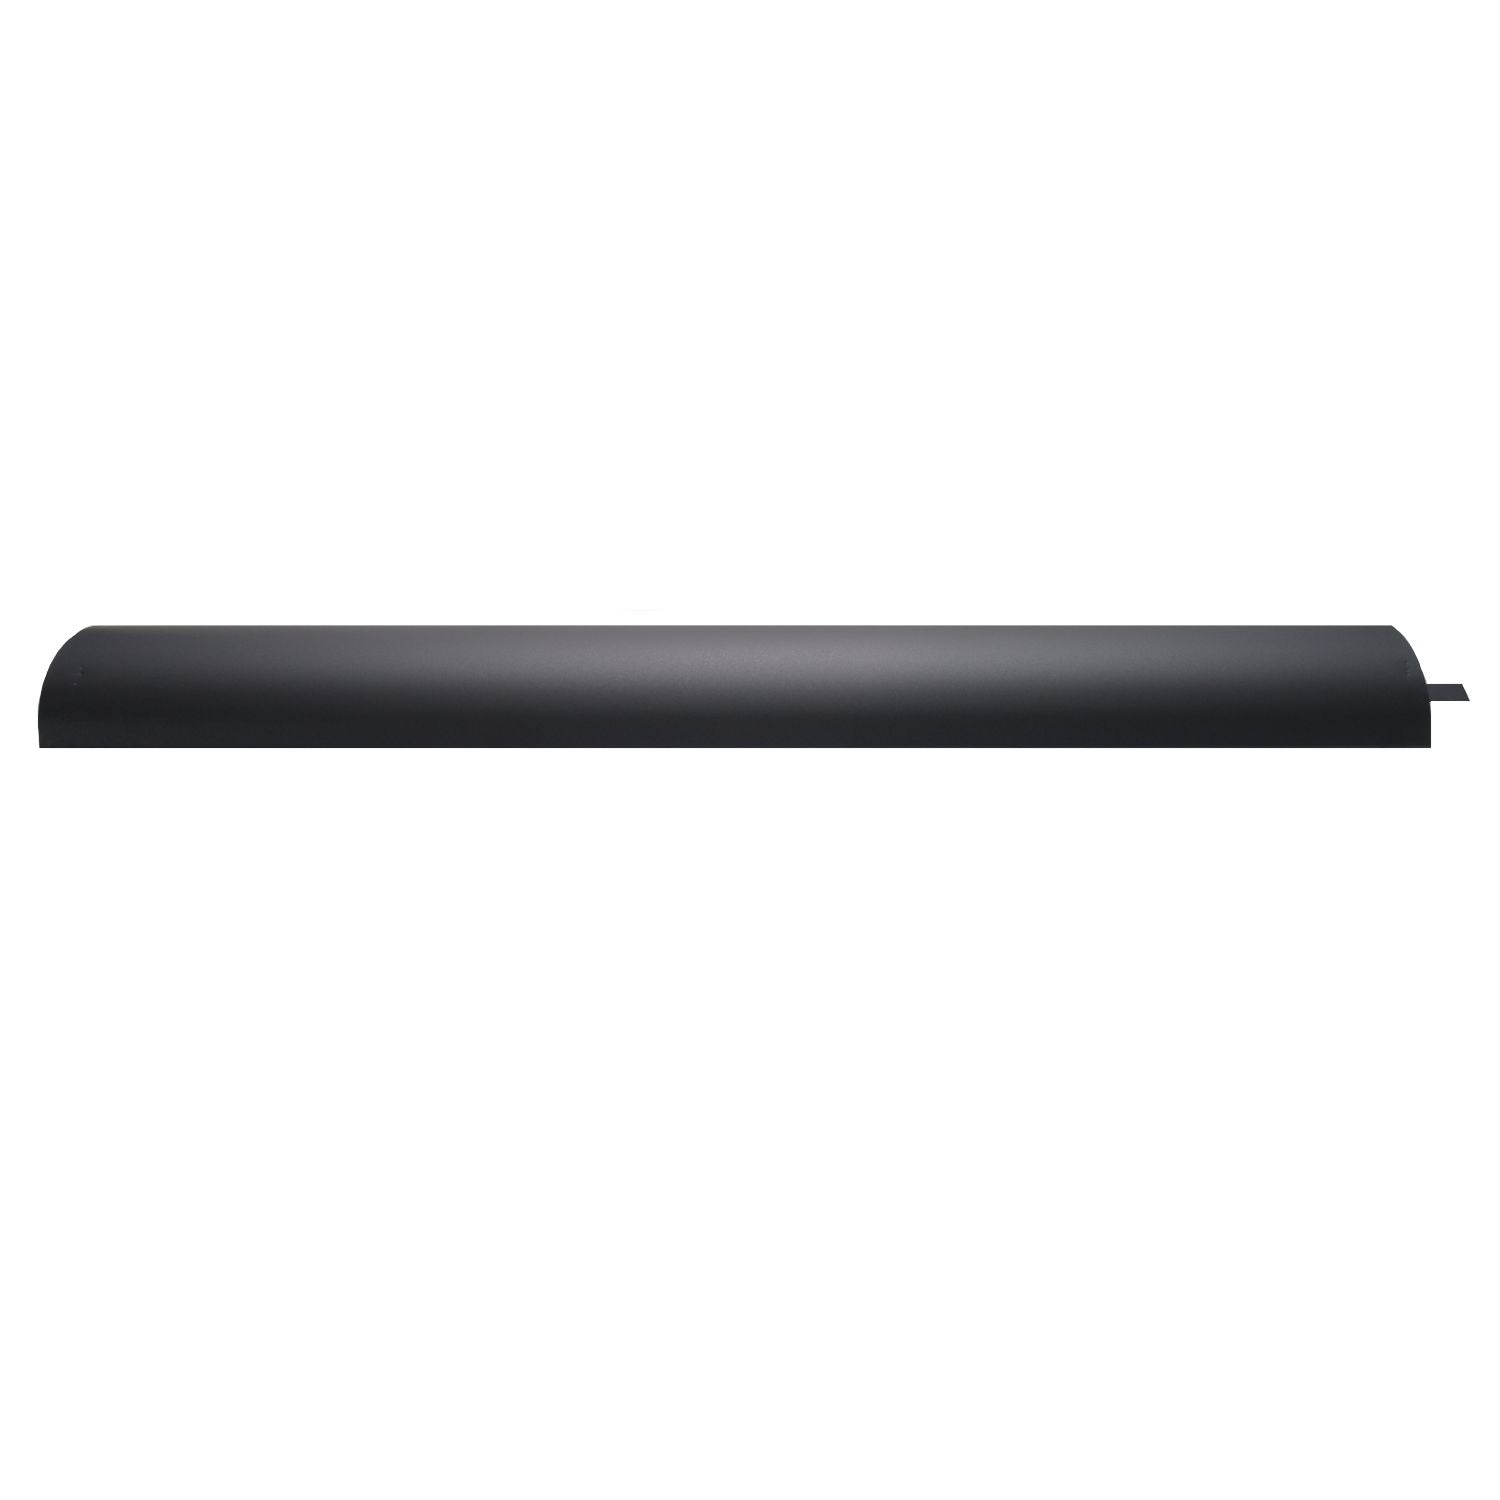 8" Fully Insulated 1000mm Painted Heat Shield - Black